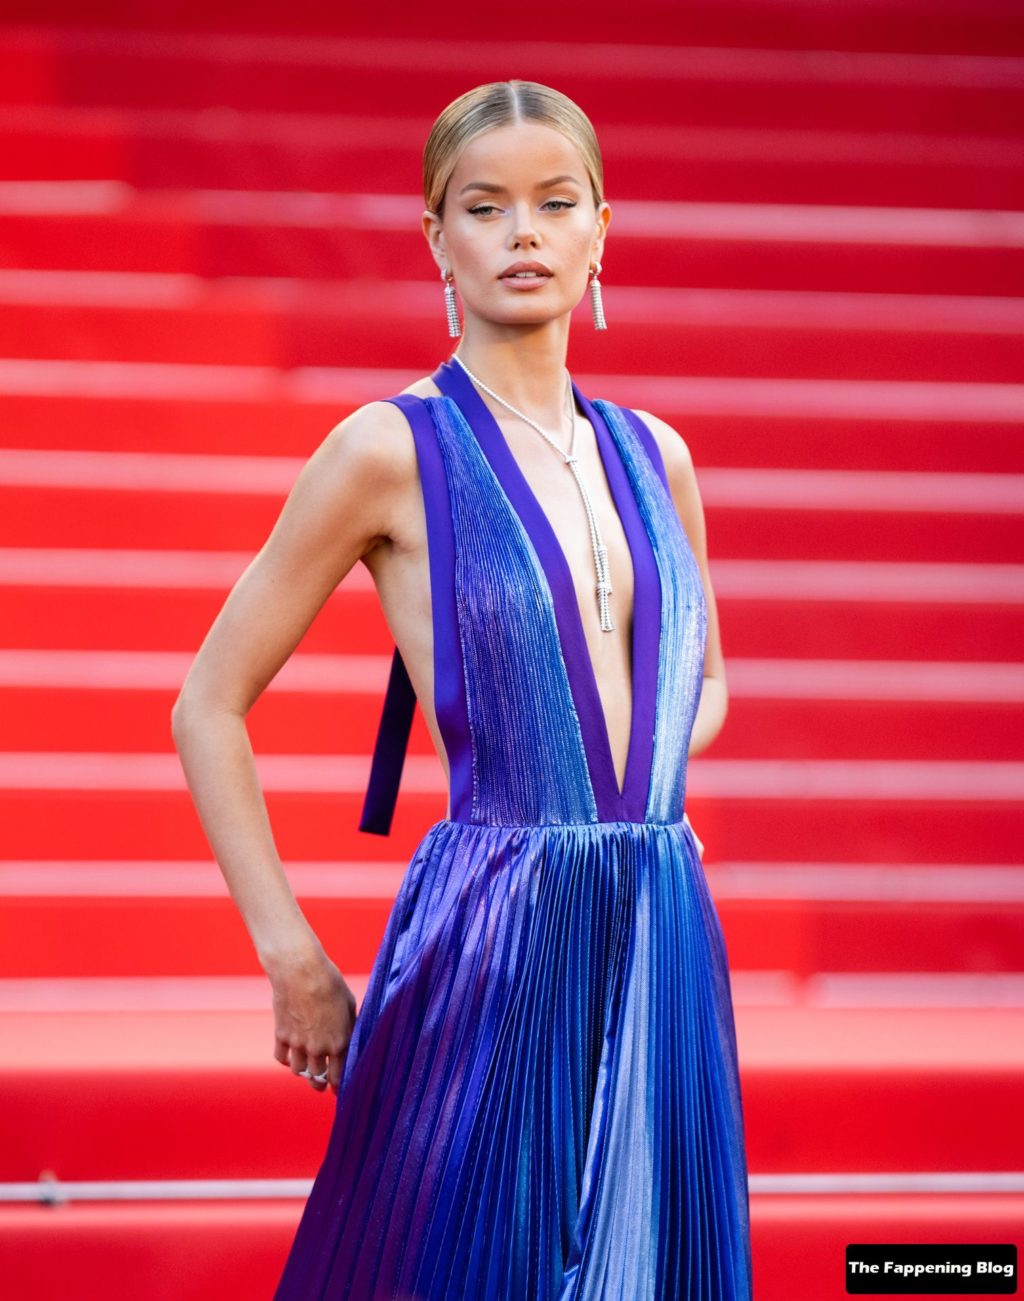 Frida Aasen Sexy The Fappening Blog 115 1 1024x1301 - Frida Aasen Poses on the Red Carpet at the 75th Annual Cannes Film Festival (150 Photos)